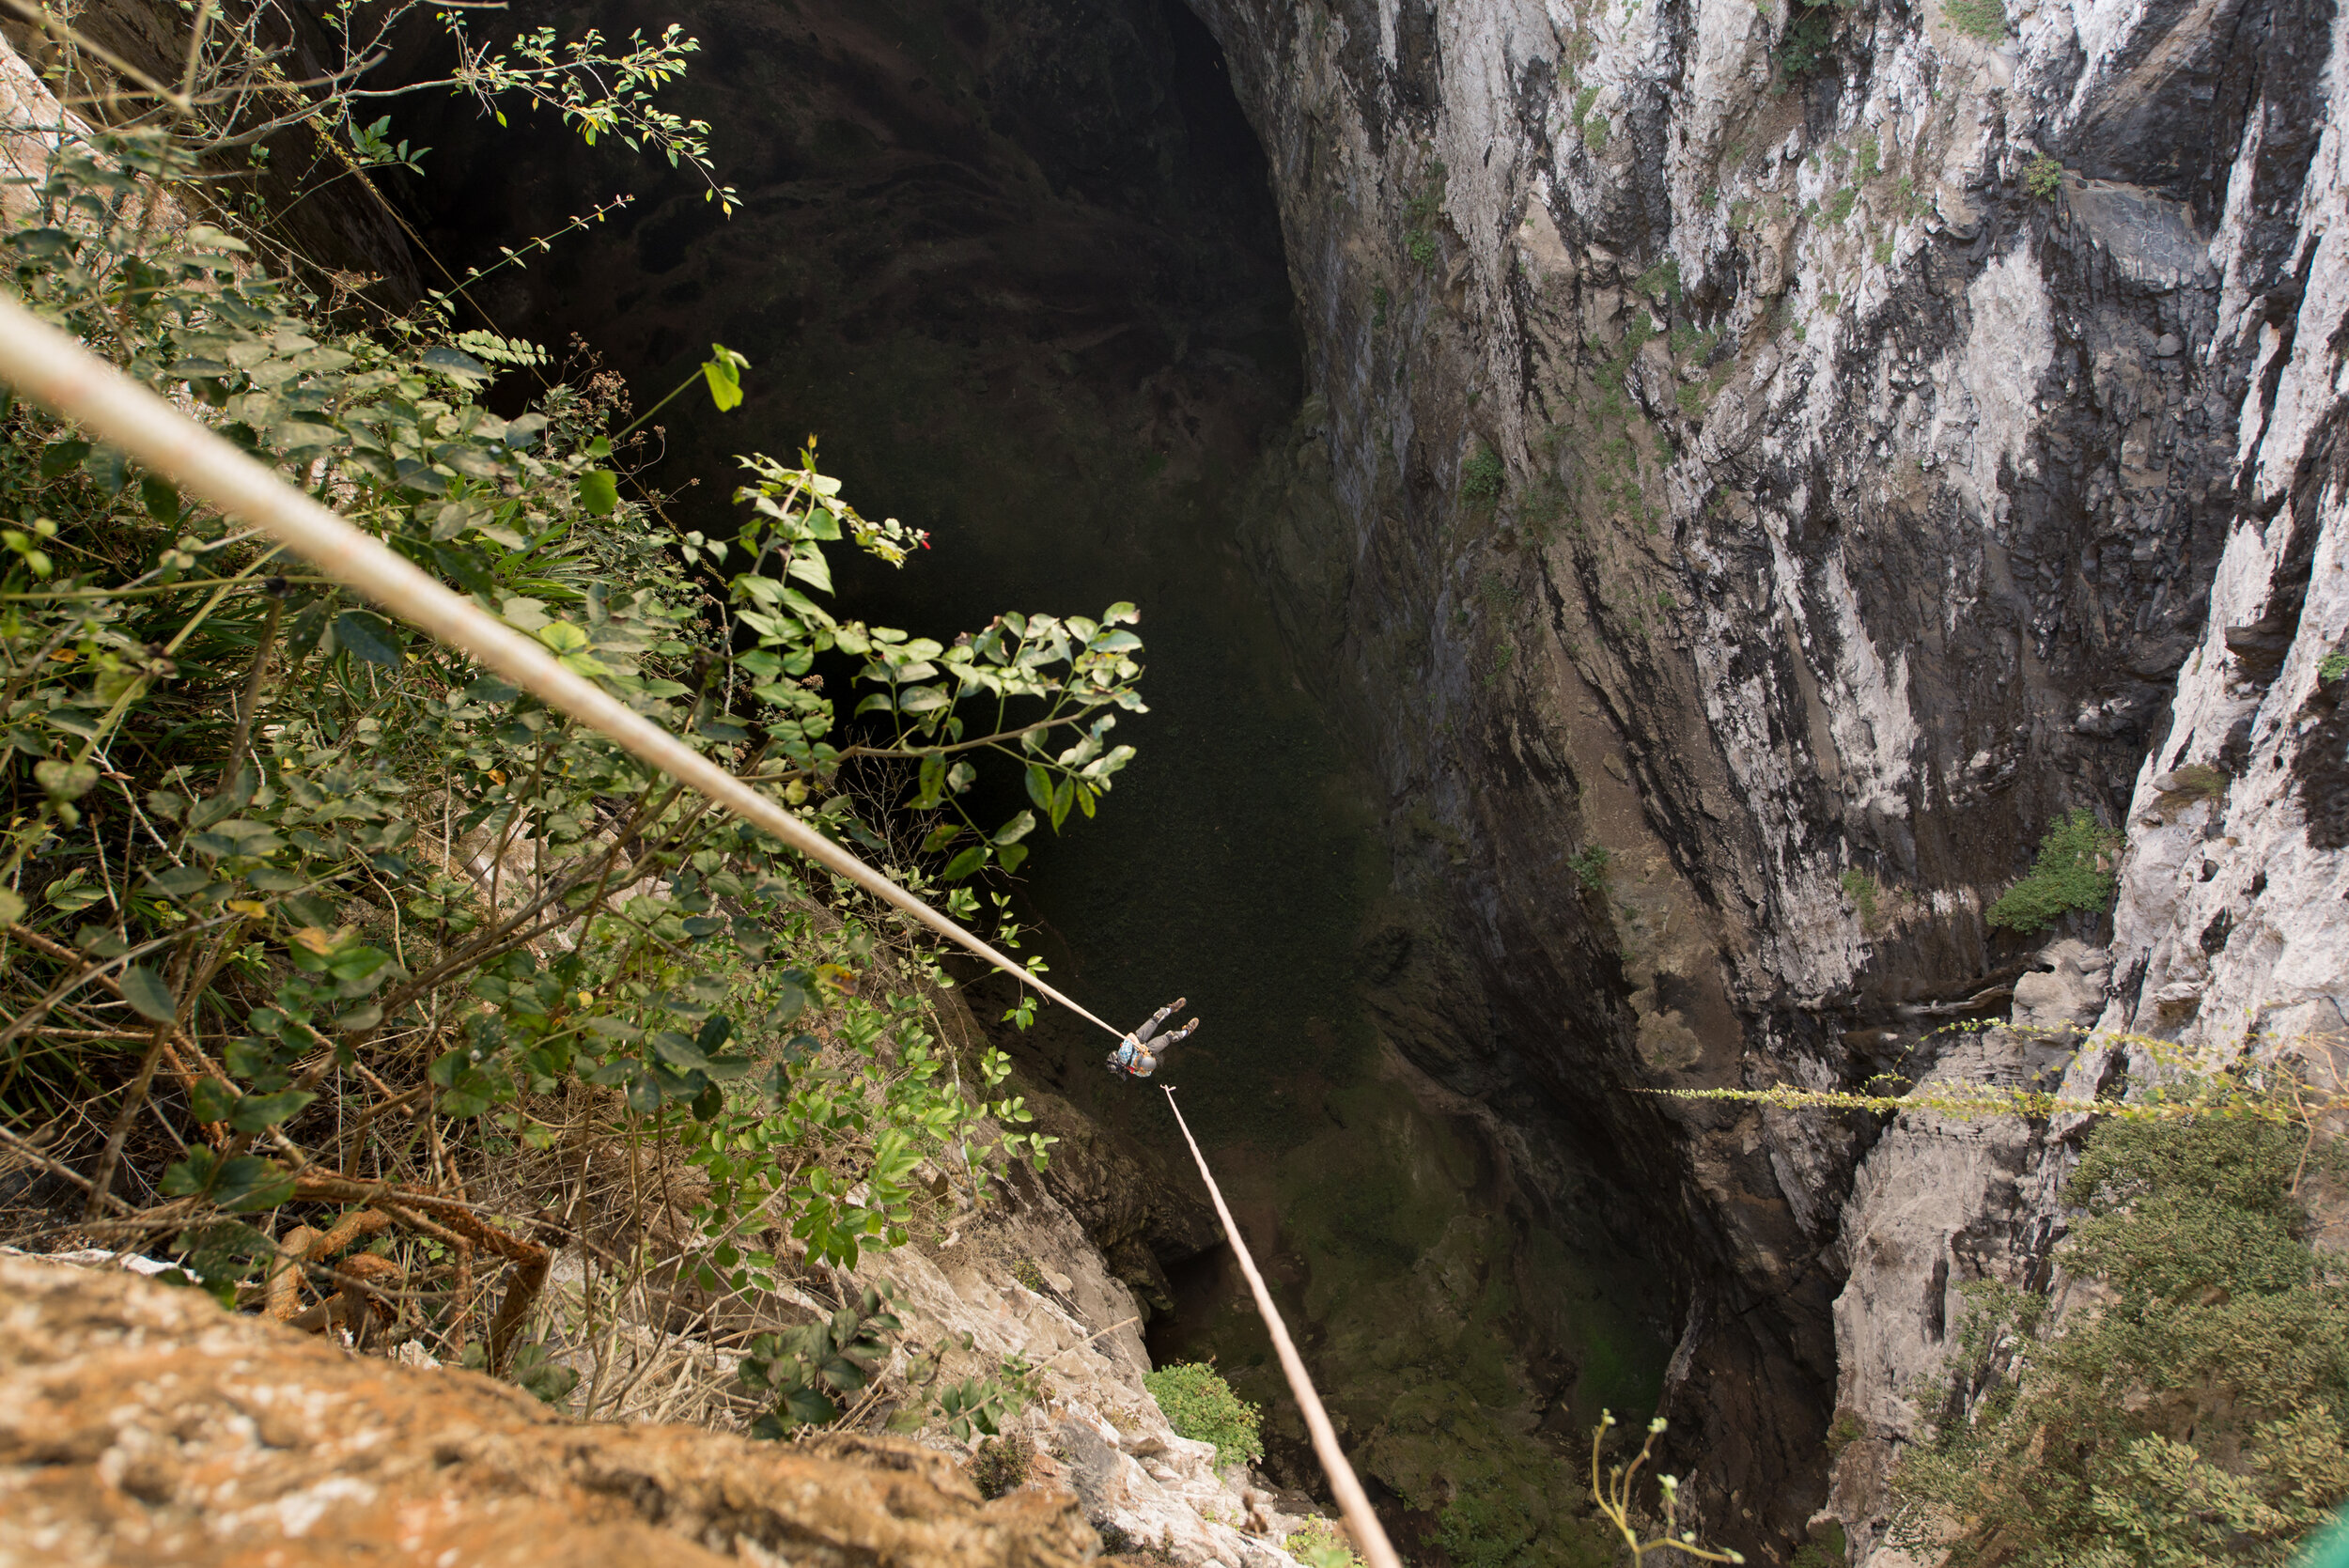  Ben floats through the empty space more than 600 feet above the cave floor. 